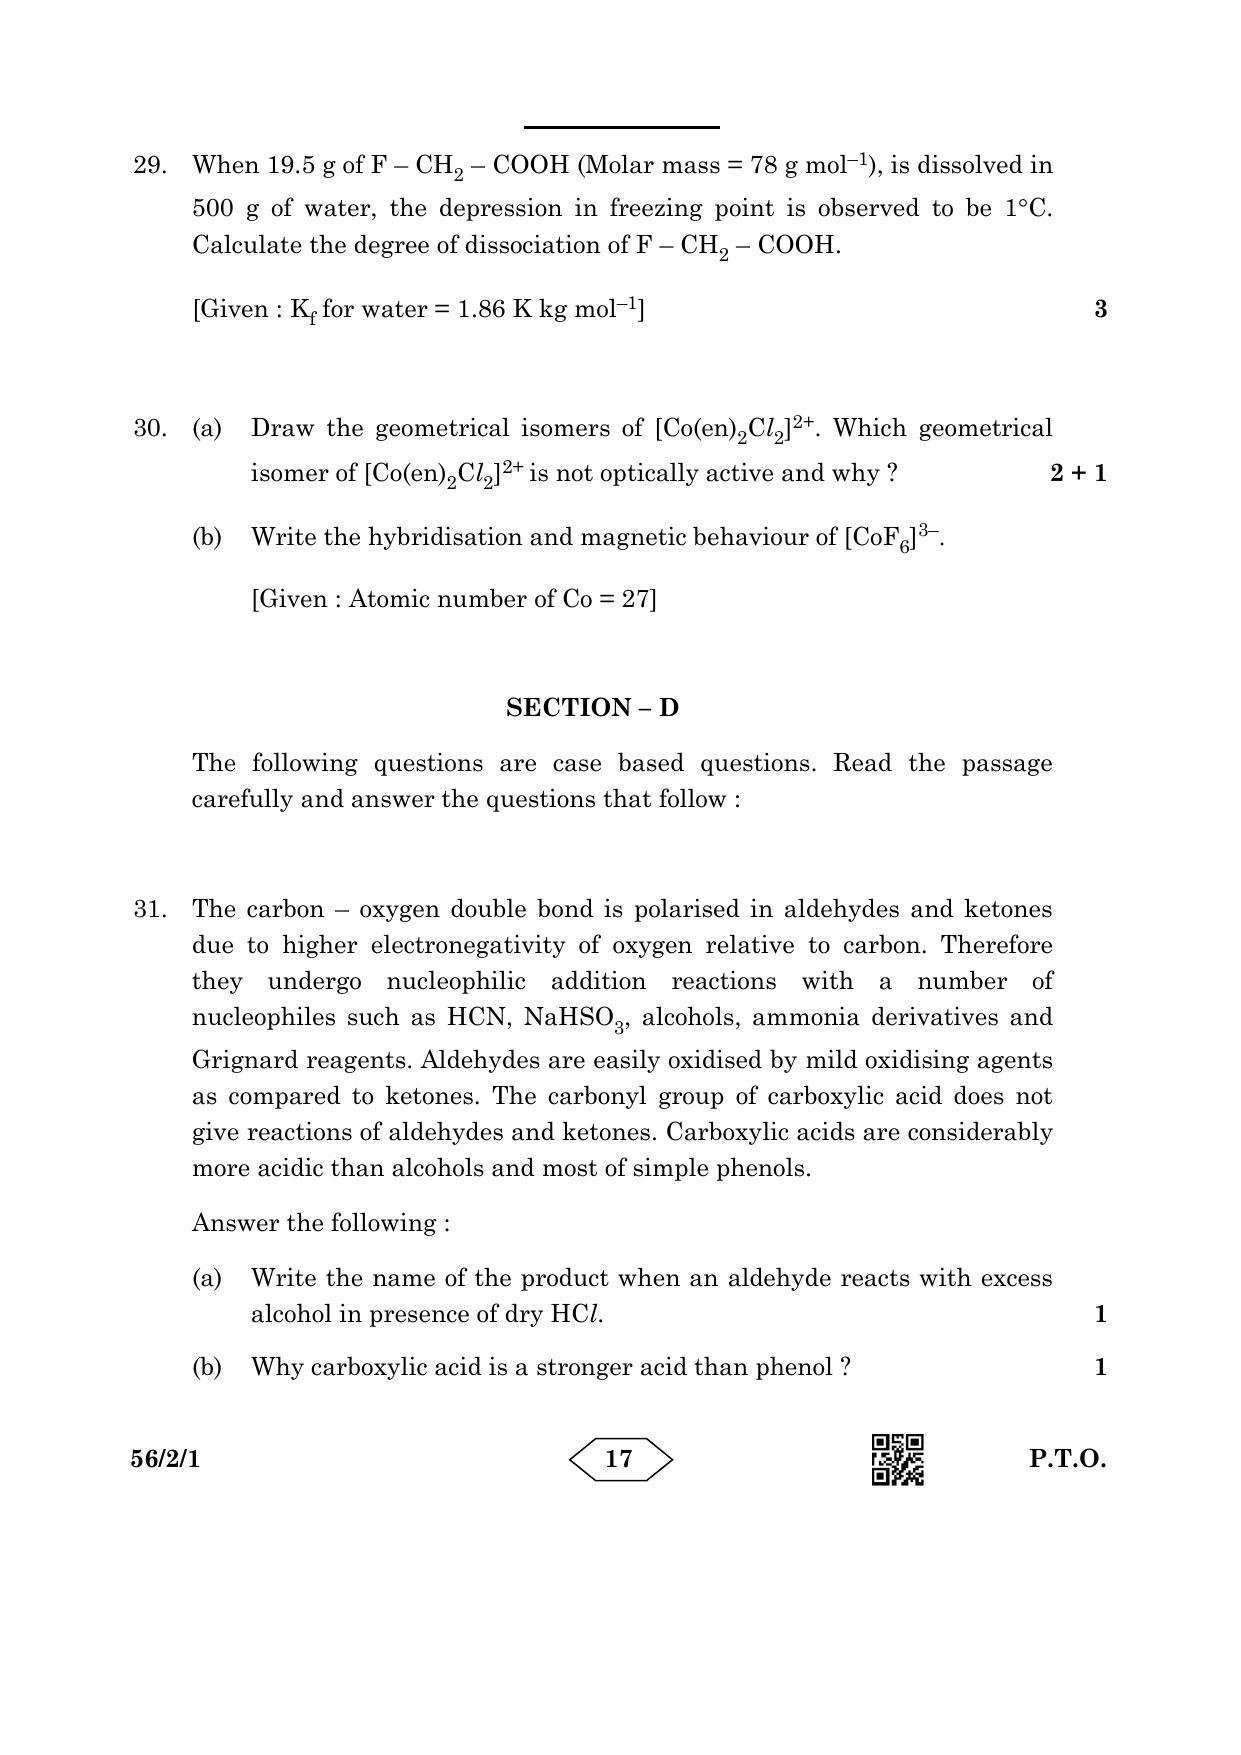 CBSE Class 12 56-2-1 Chemistry 2023 Question Paper - Page 17